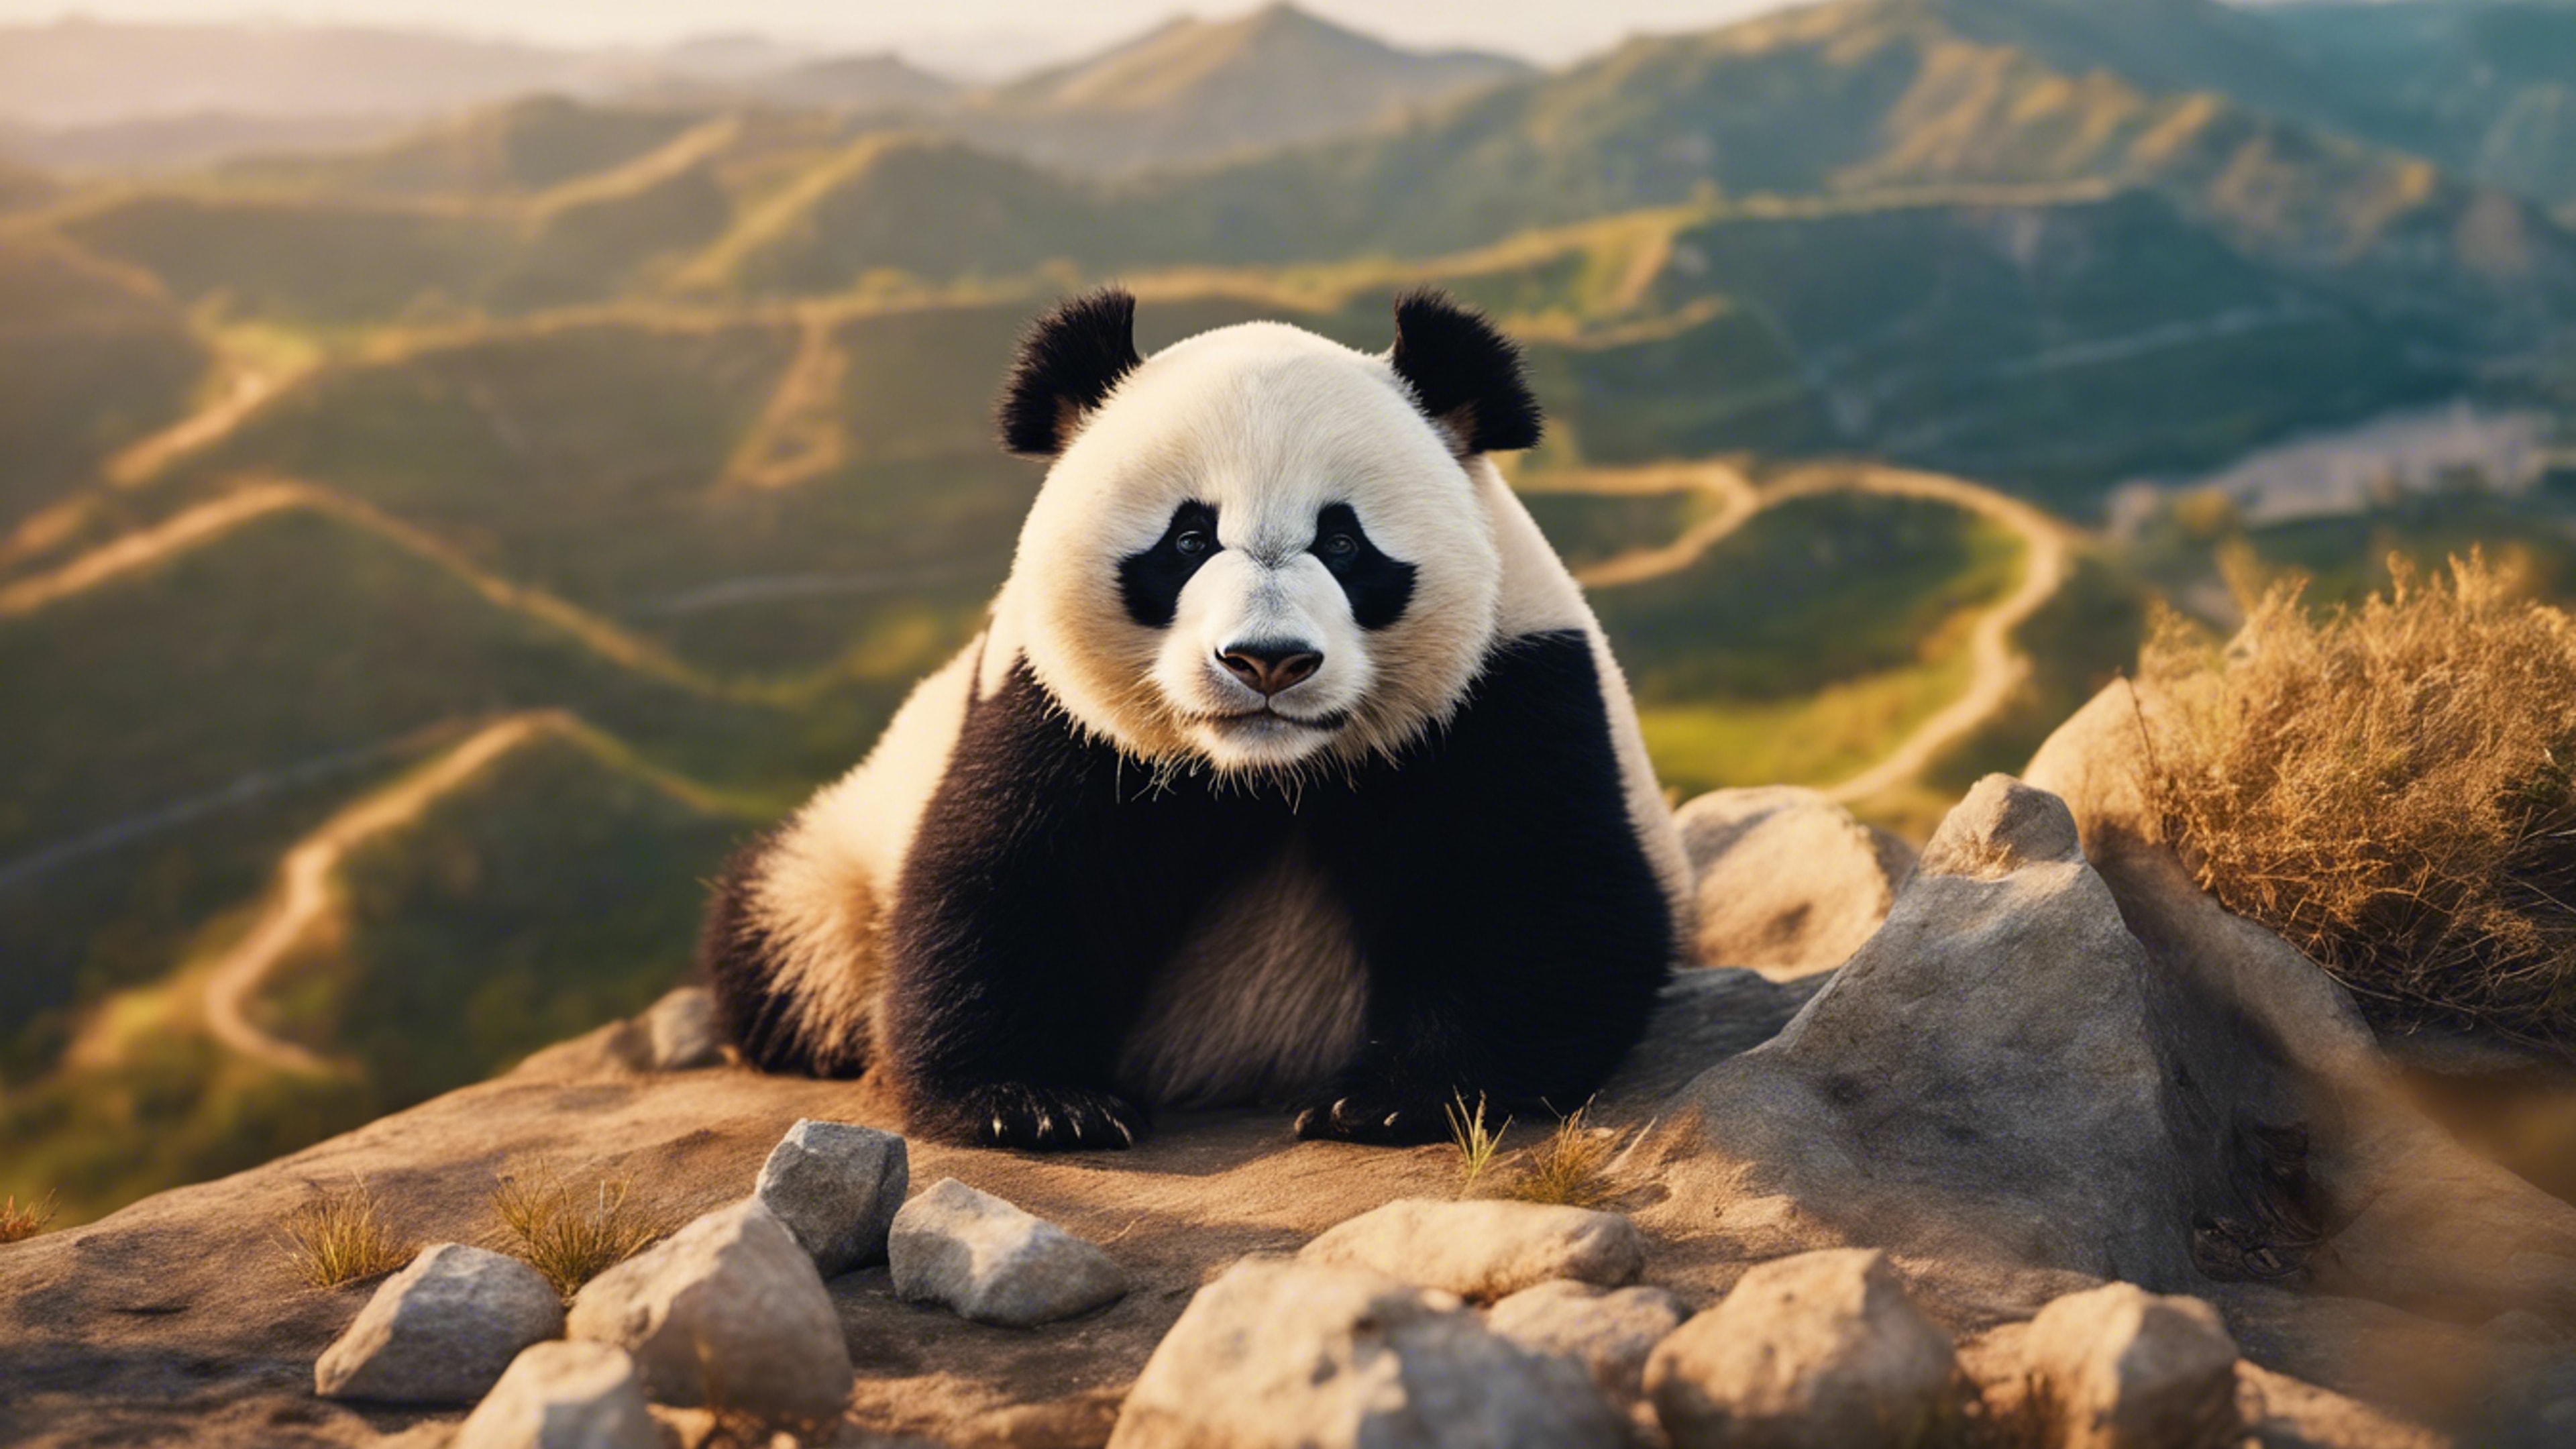 A proud panda basking in the warm sunlight, on a cliff overlooking a wide, beautiful valley. Tapéta[f1b4c4cbced14ad39a34]